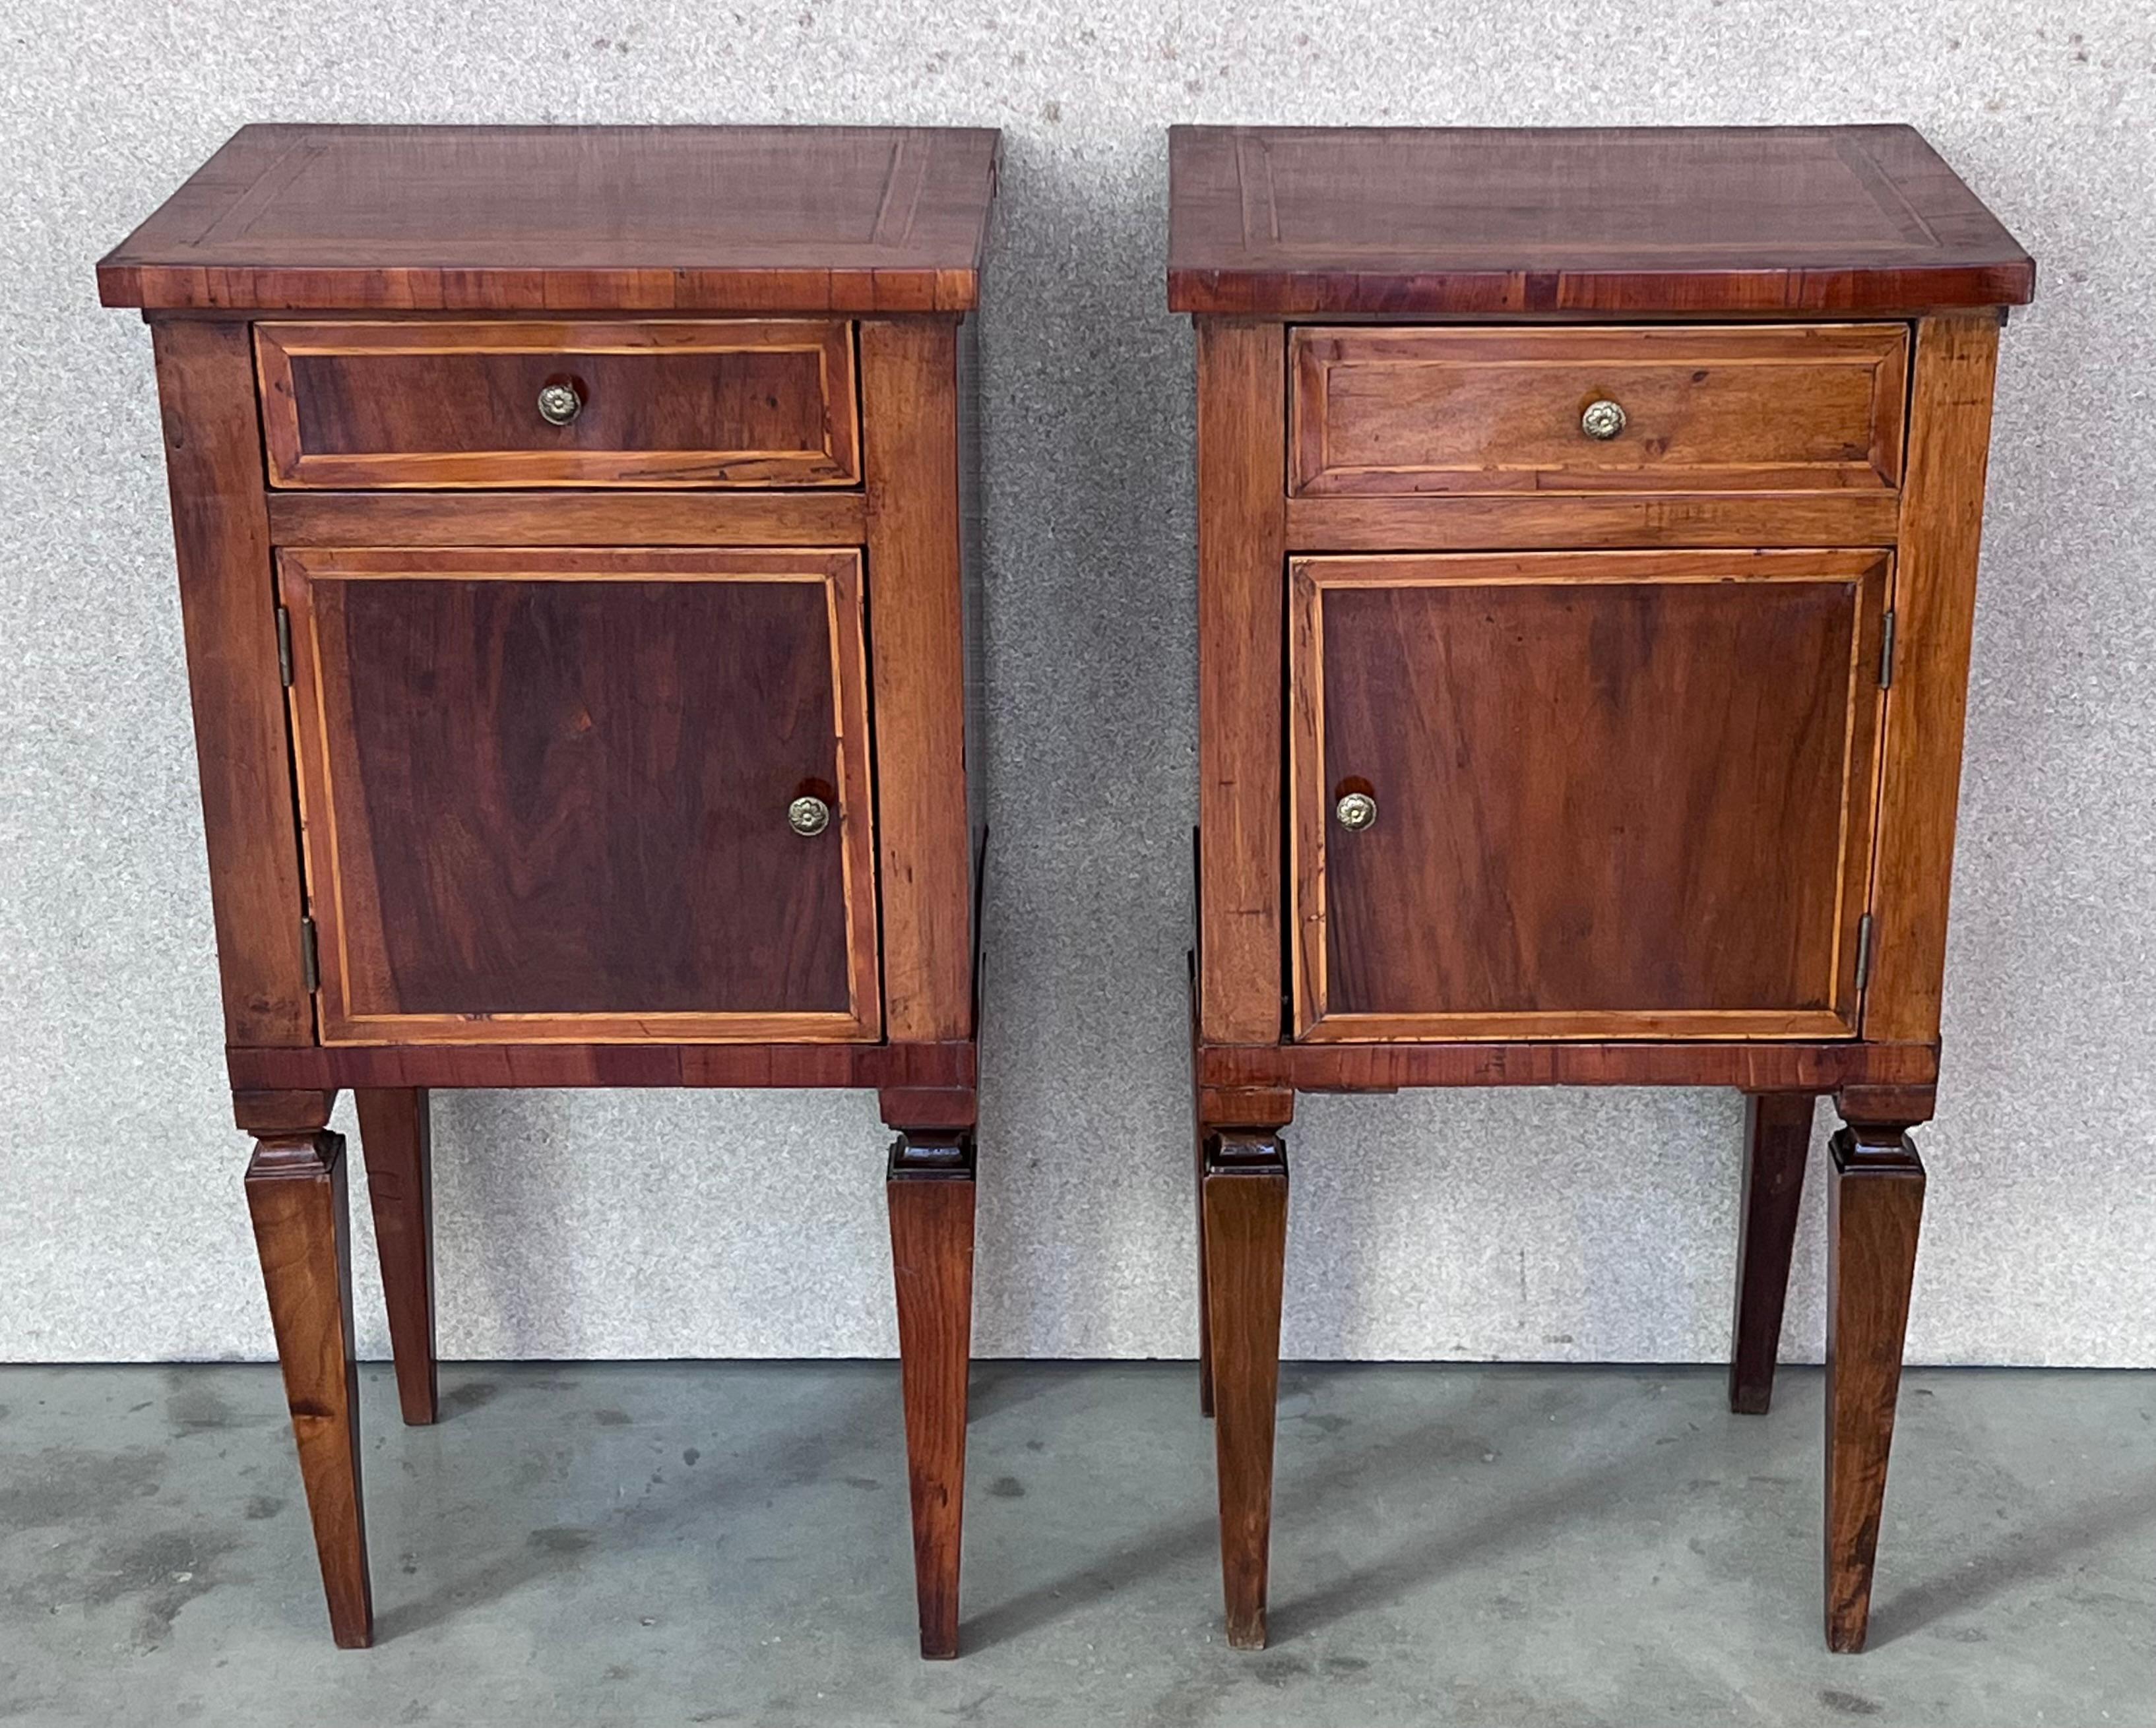 A 18th century French Louis XVI style marquetry side table, or nightstand, with a marquetry top. One dovetailed drawer above cabinet doors. Made of inlaid veneer of various woods, mainly mahogany. Slender legs. In excellent condition with only minor